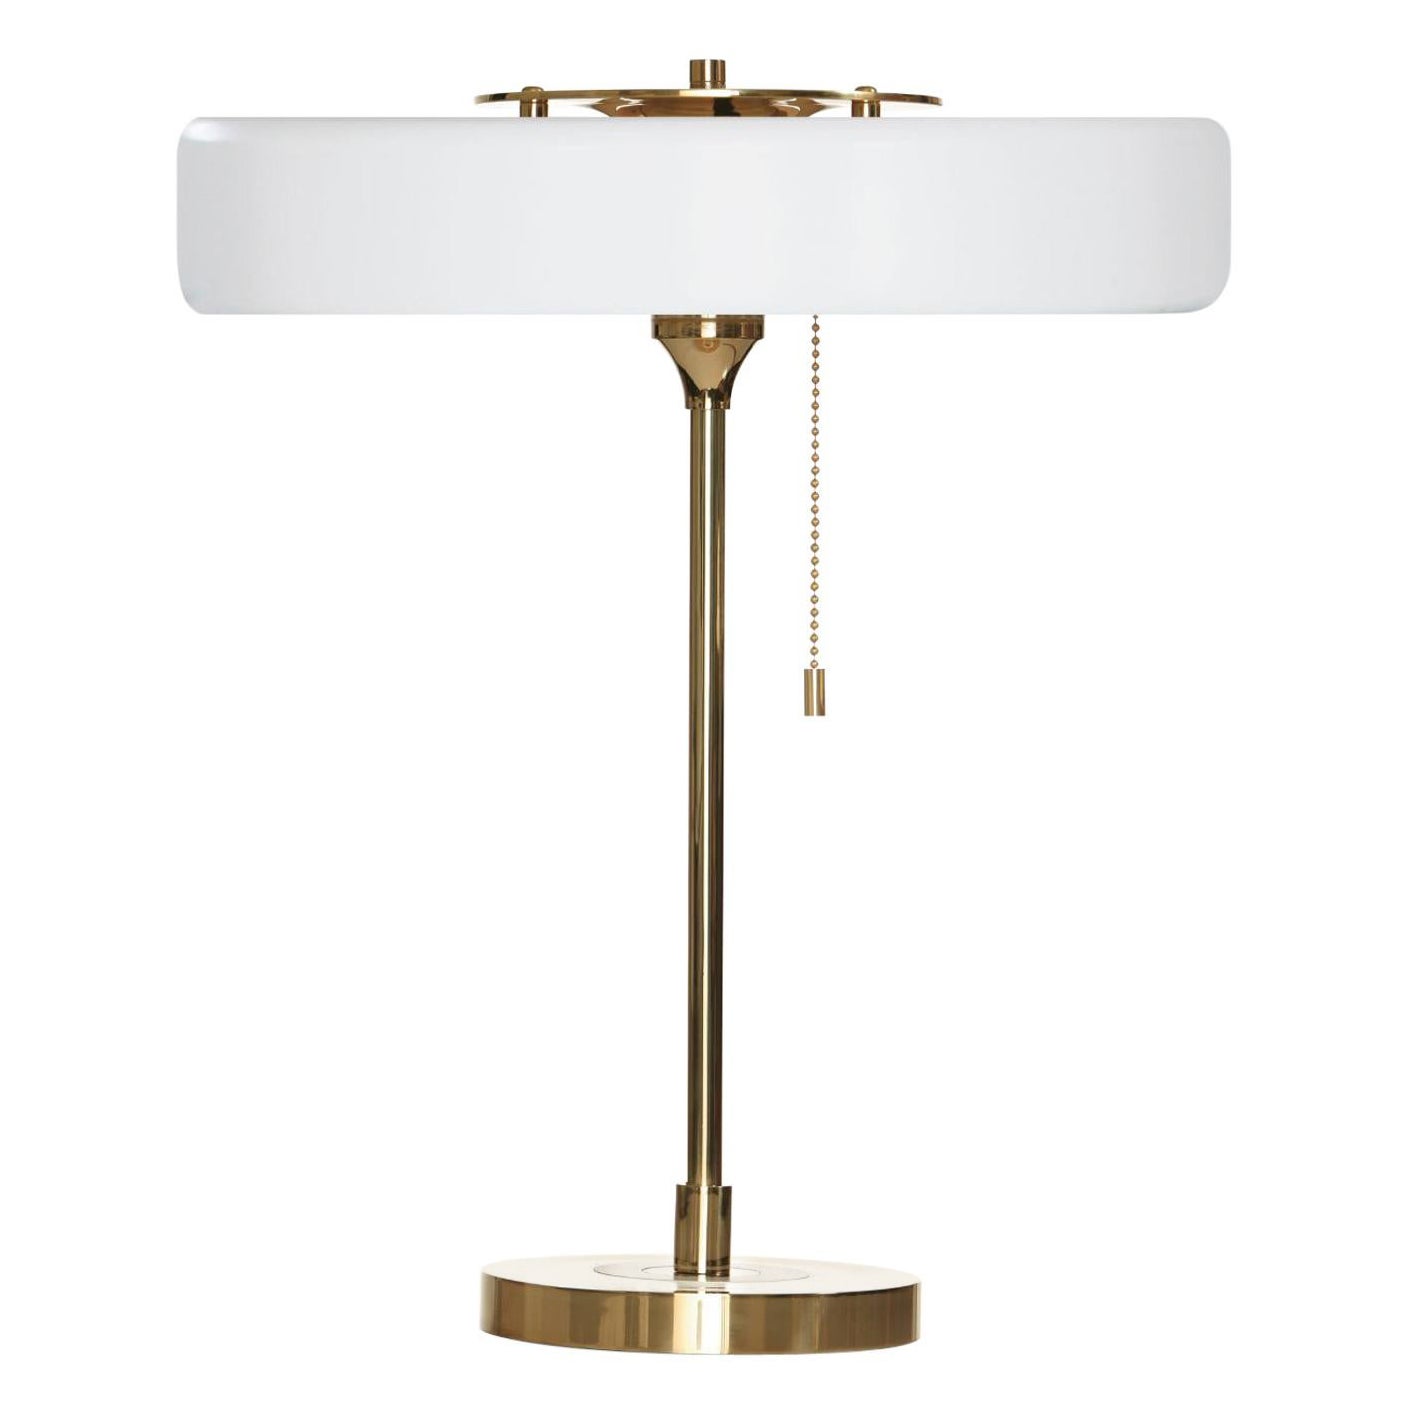 Revolve Table Lamp, Polished Brass, White by Bert Frank